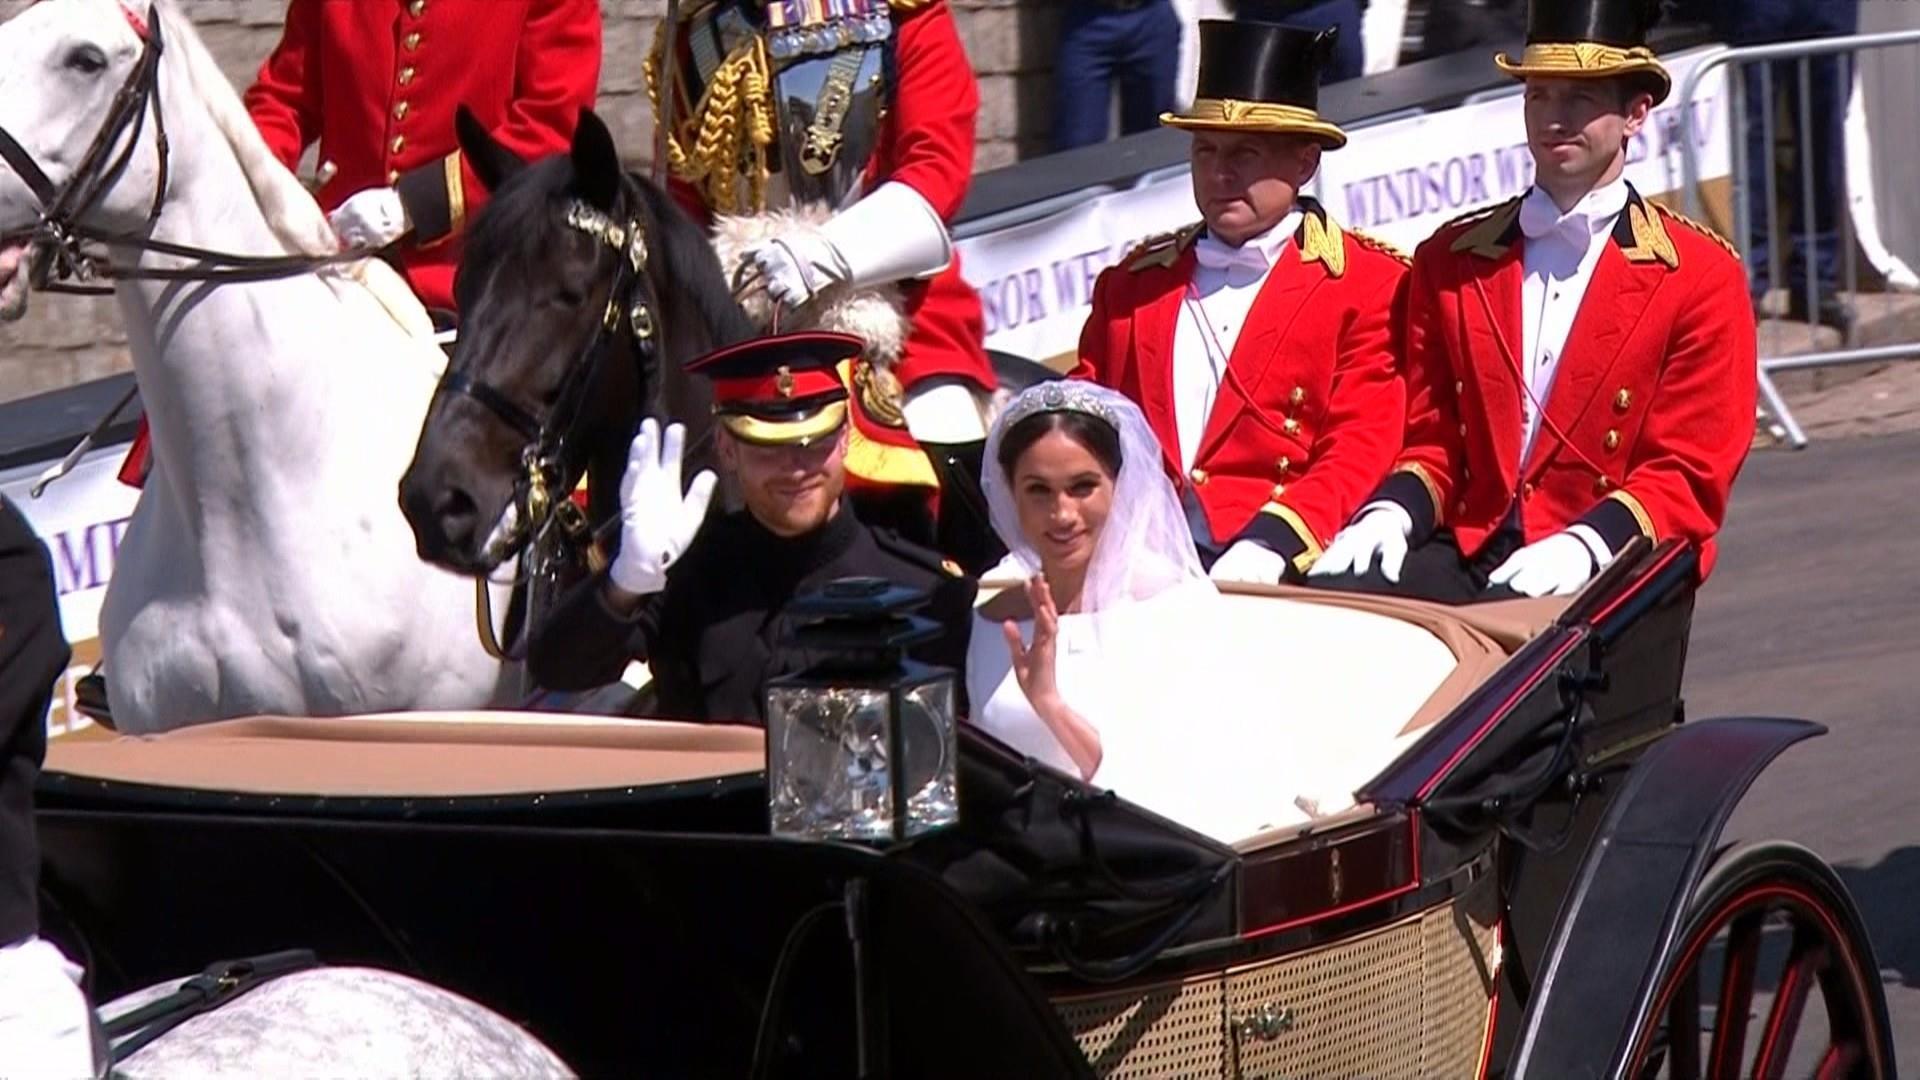 tdy_news_royals_carriage_ride_808am_180519_